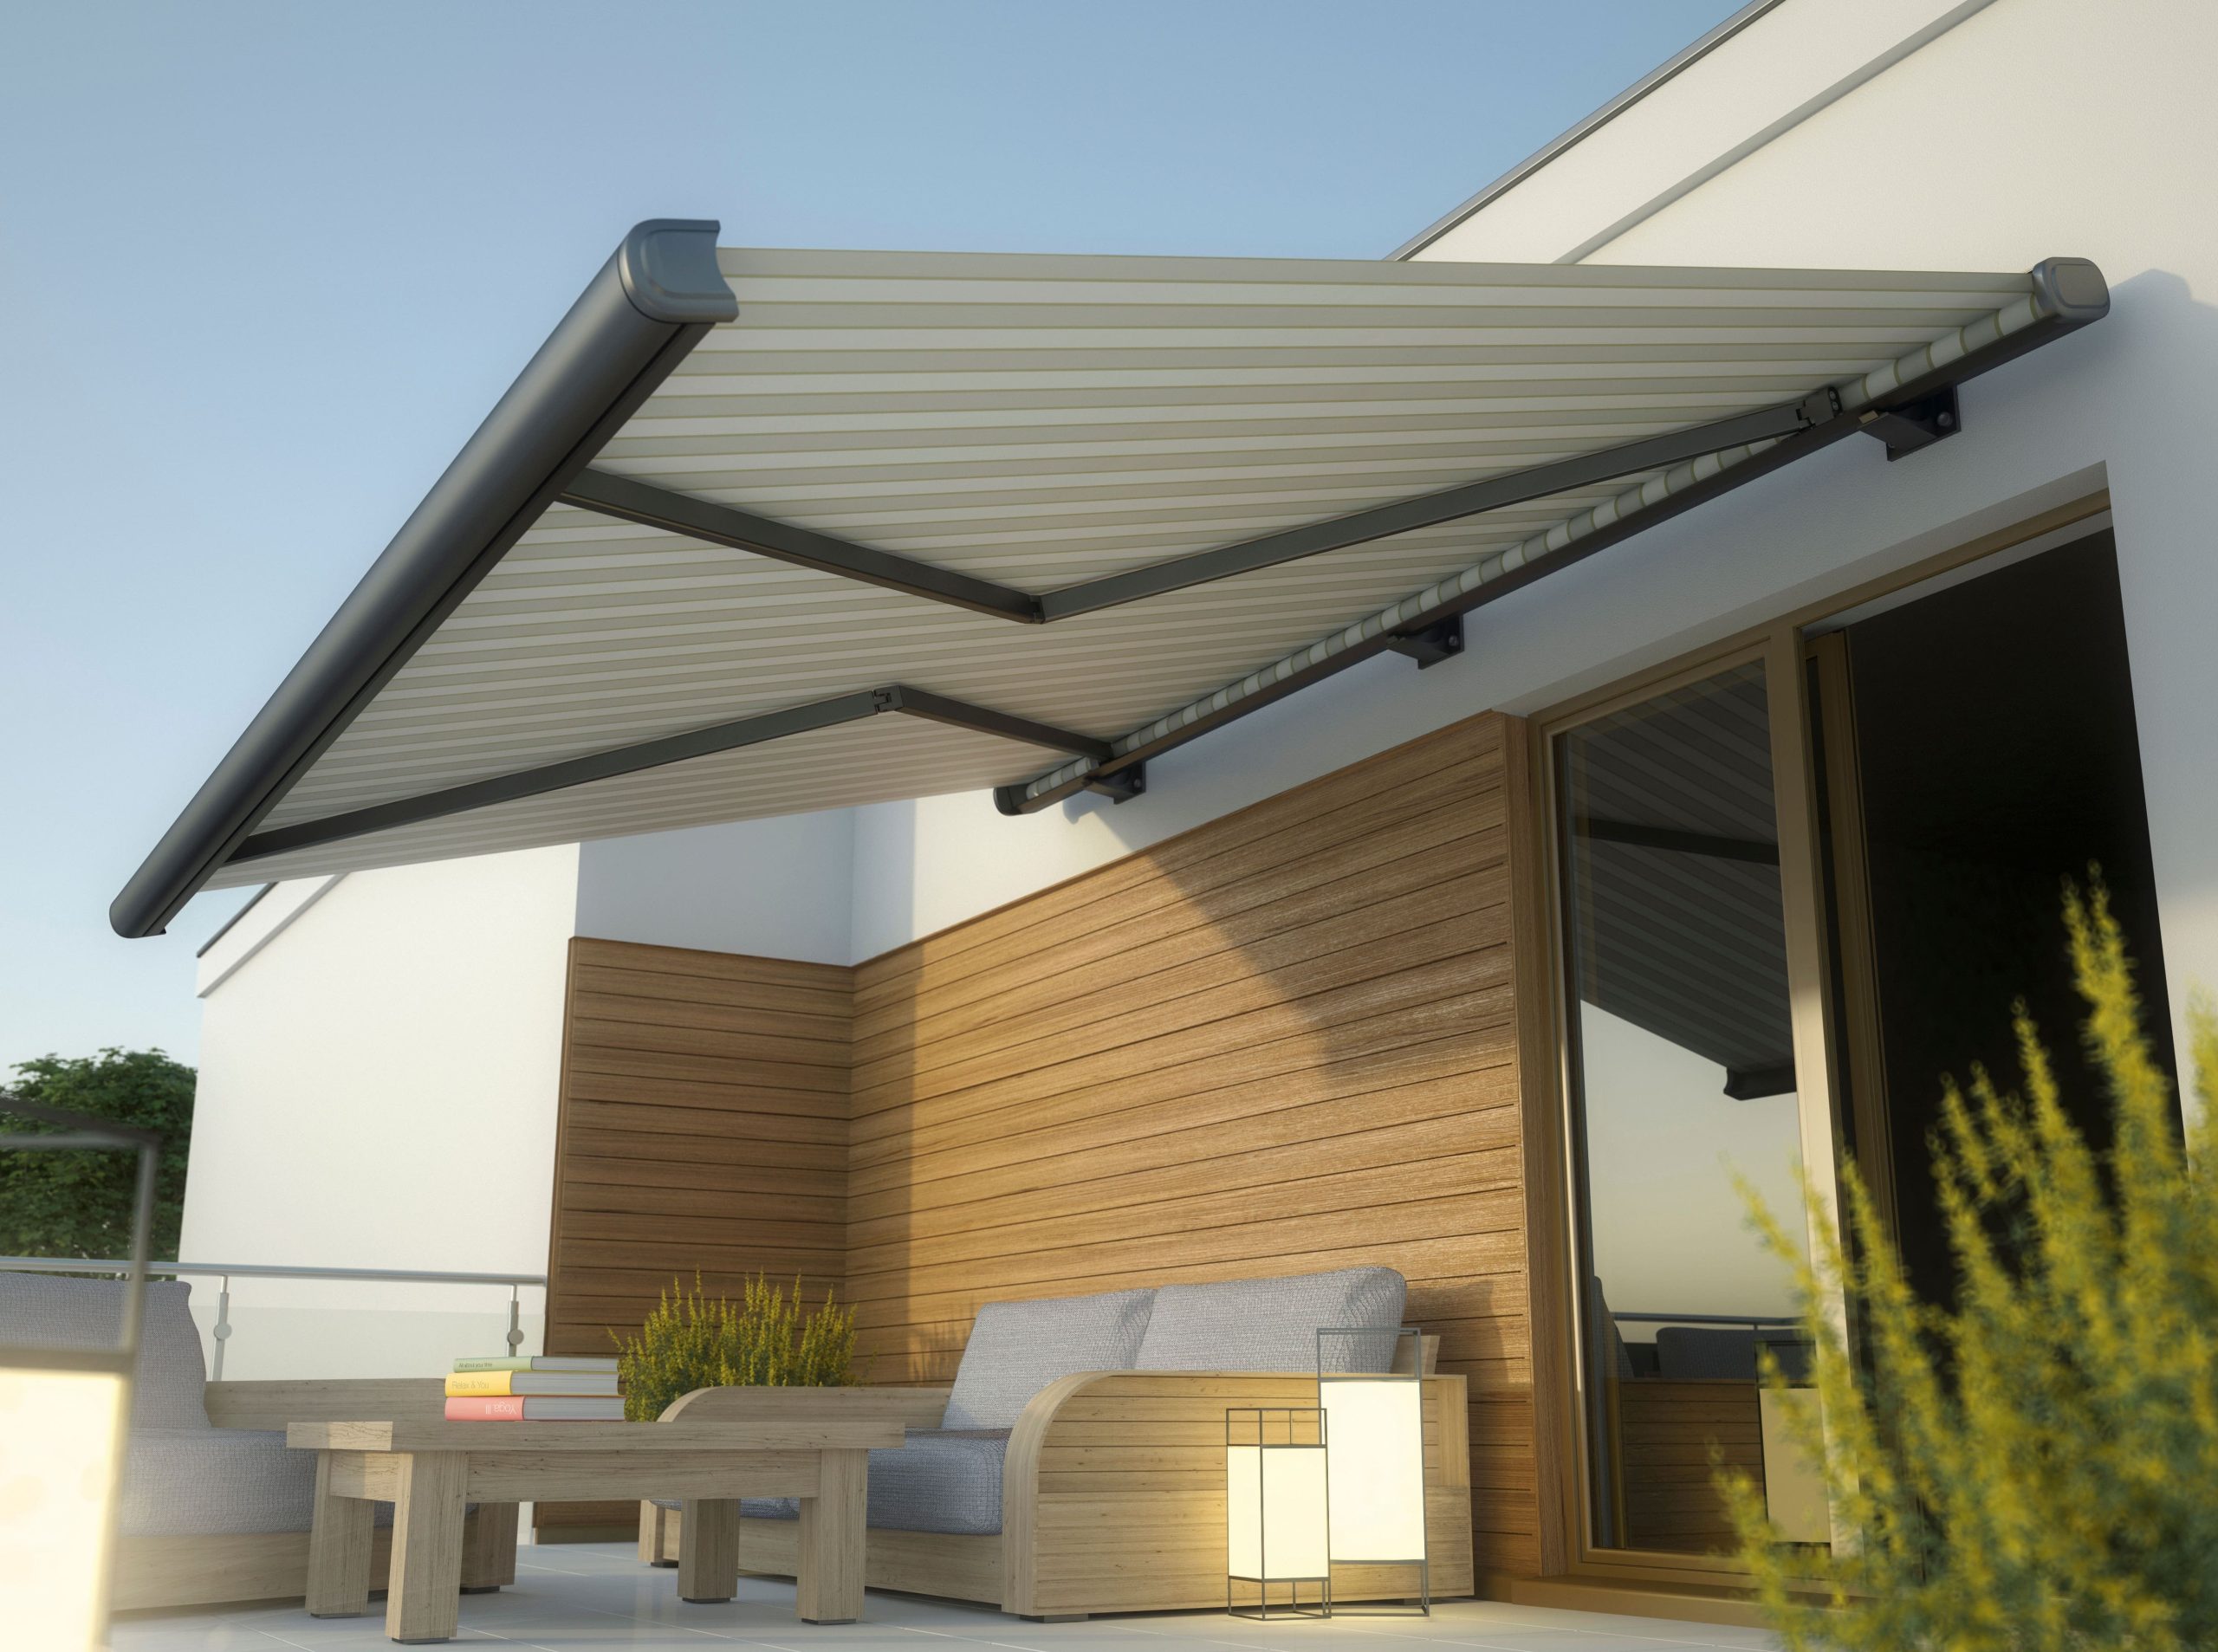 Custom retractable awnings installation in Bel Air